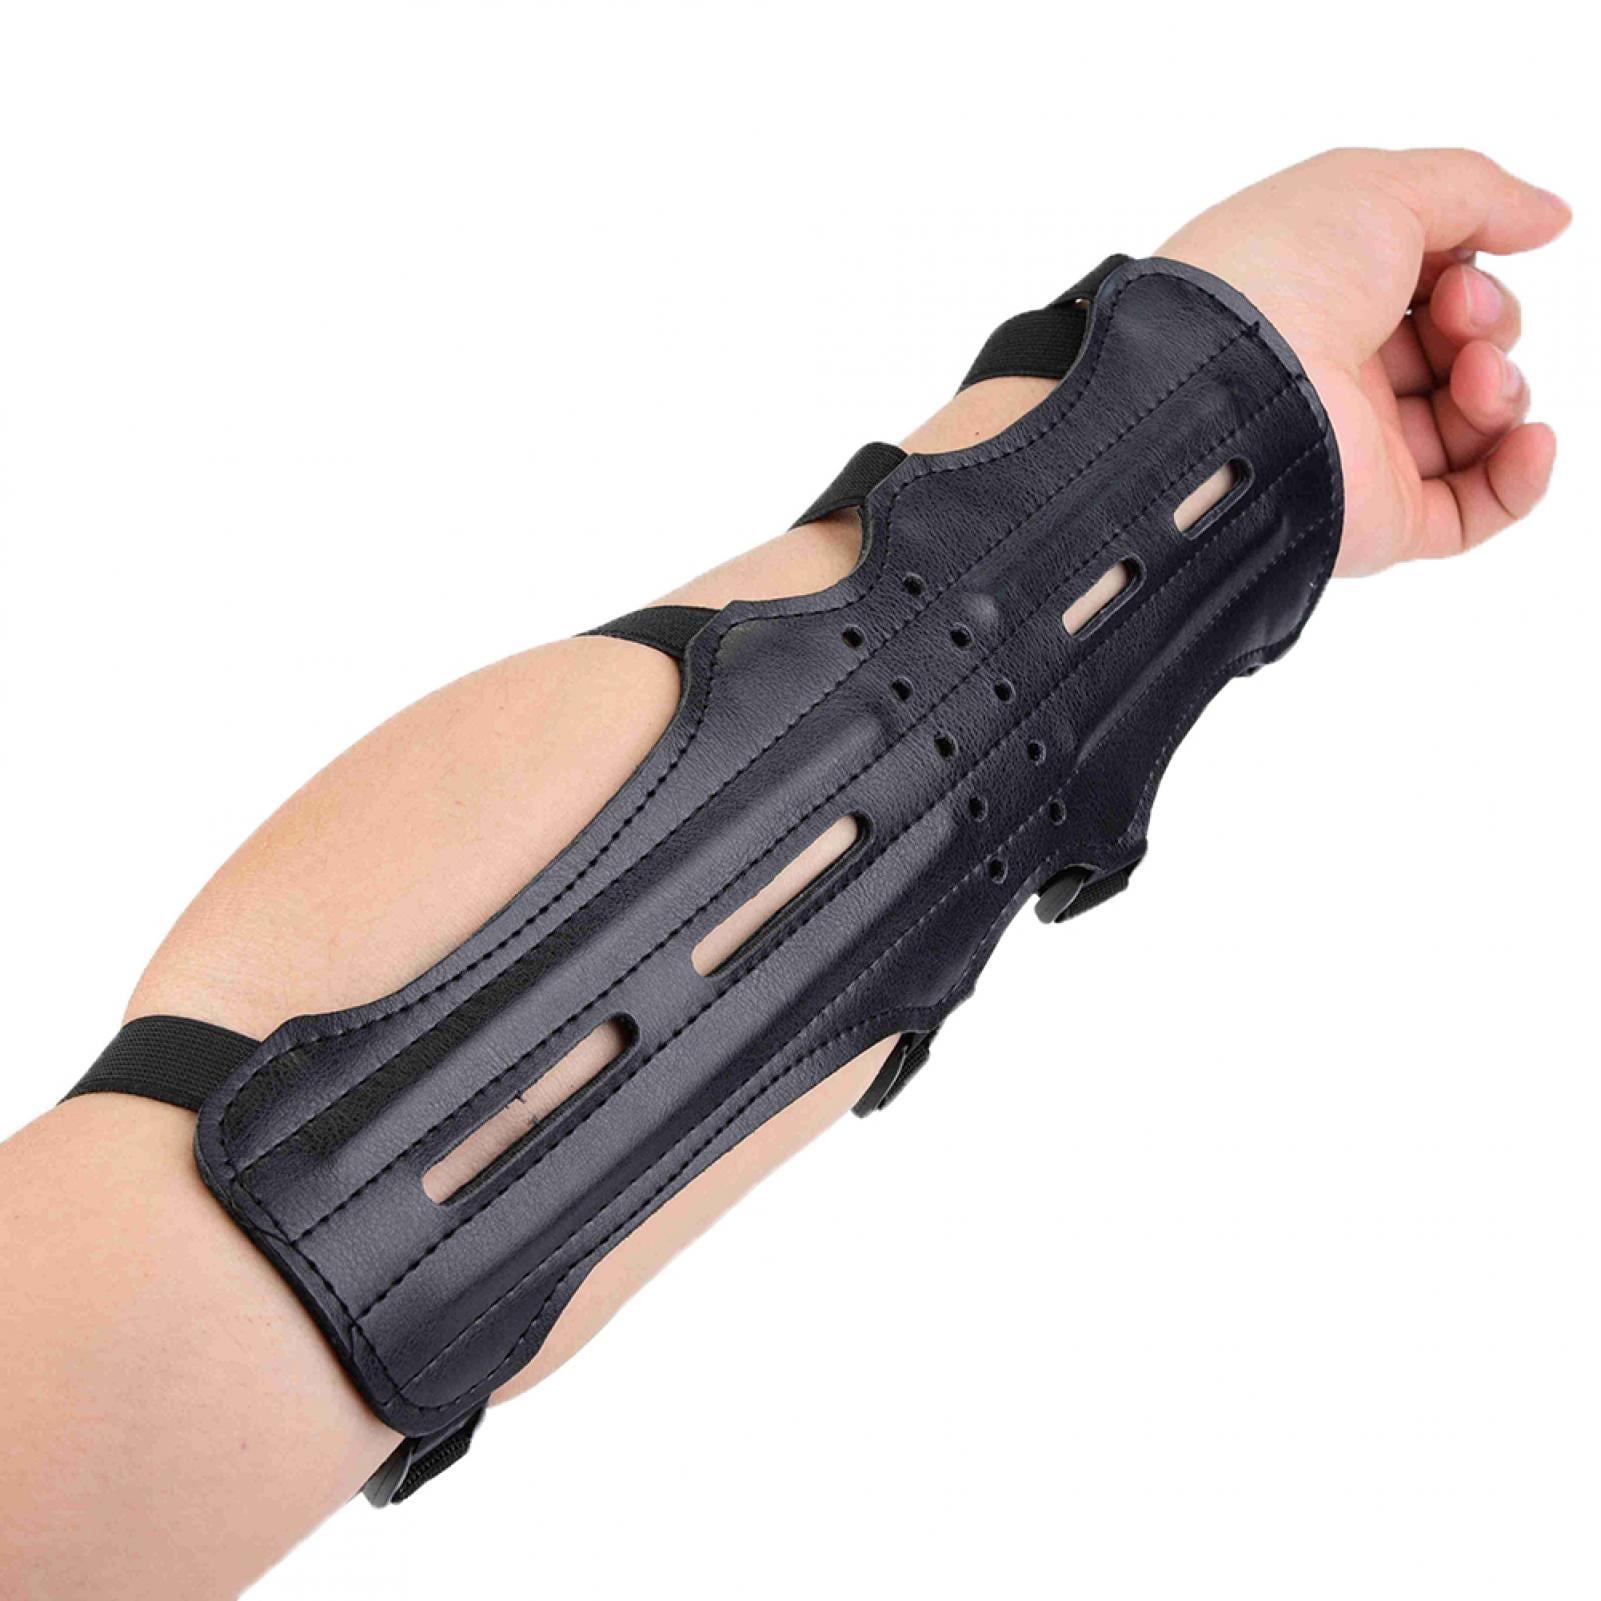 Adjustable Outdoor Bracer Archery Glove Arm Band Arm Guard Shooting. 